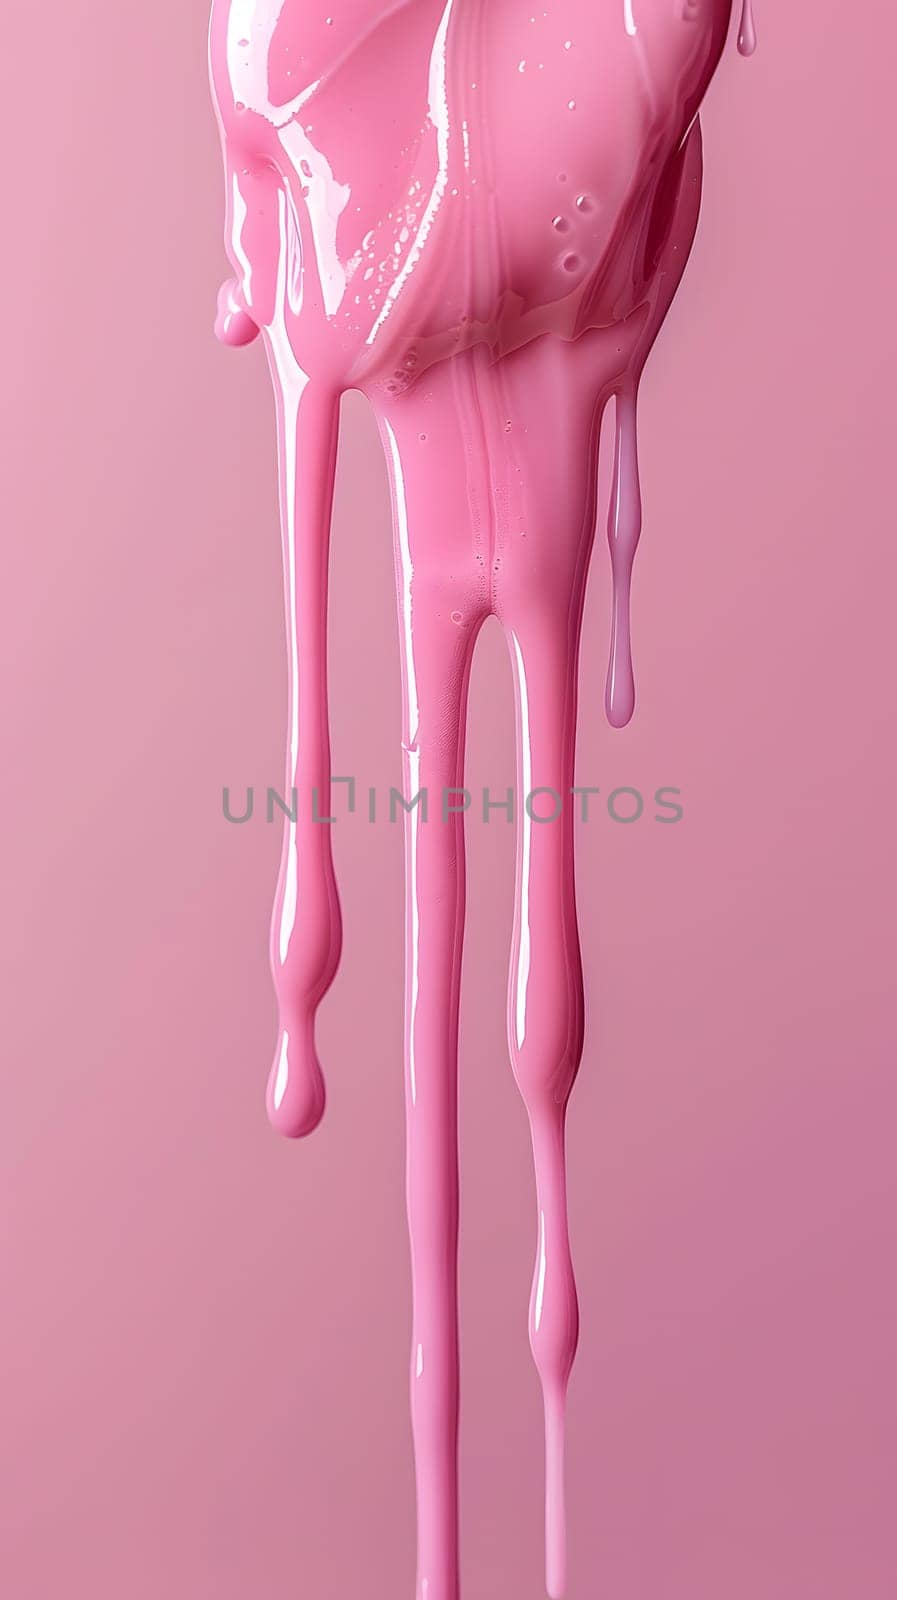 Closeup of pink paint dripping on pink background, showing human body gesture by Nadtochiy